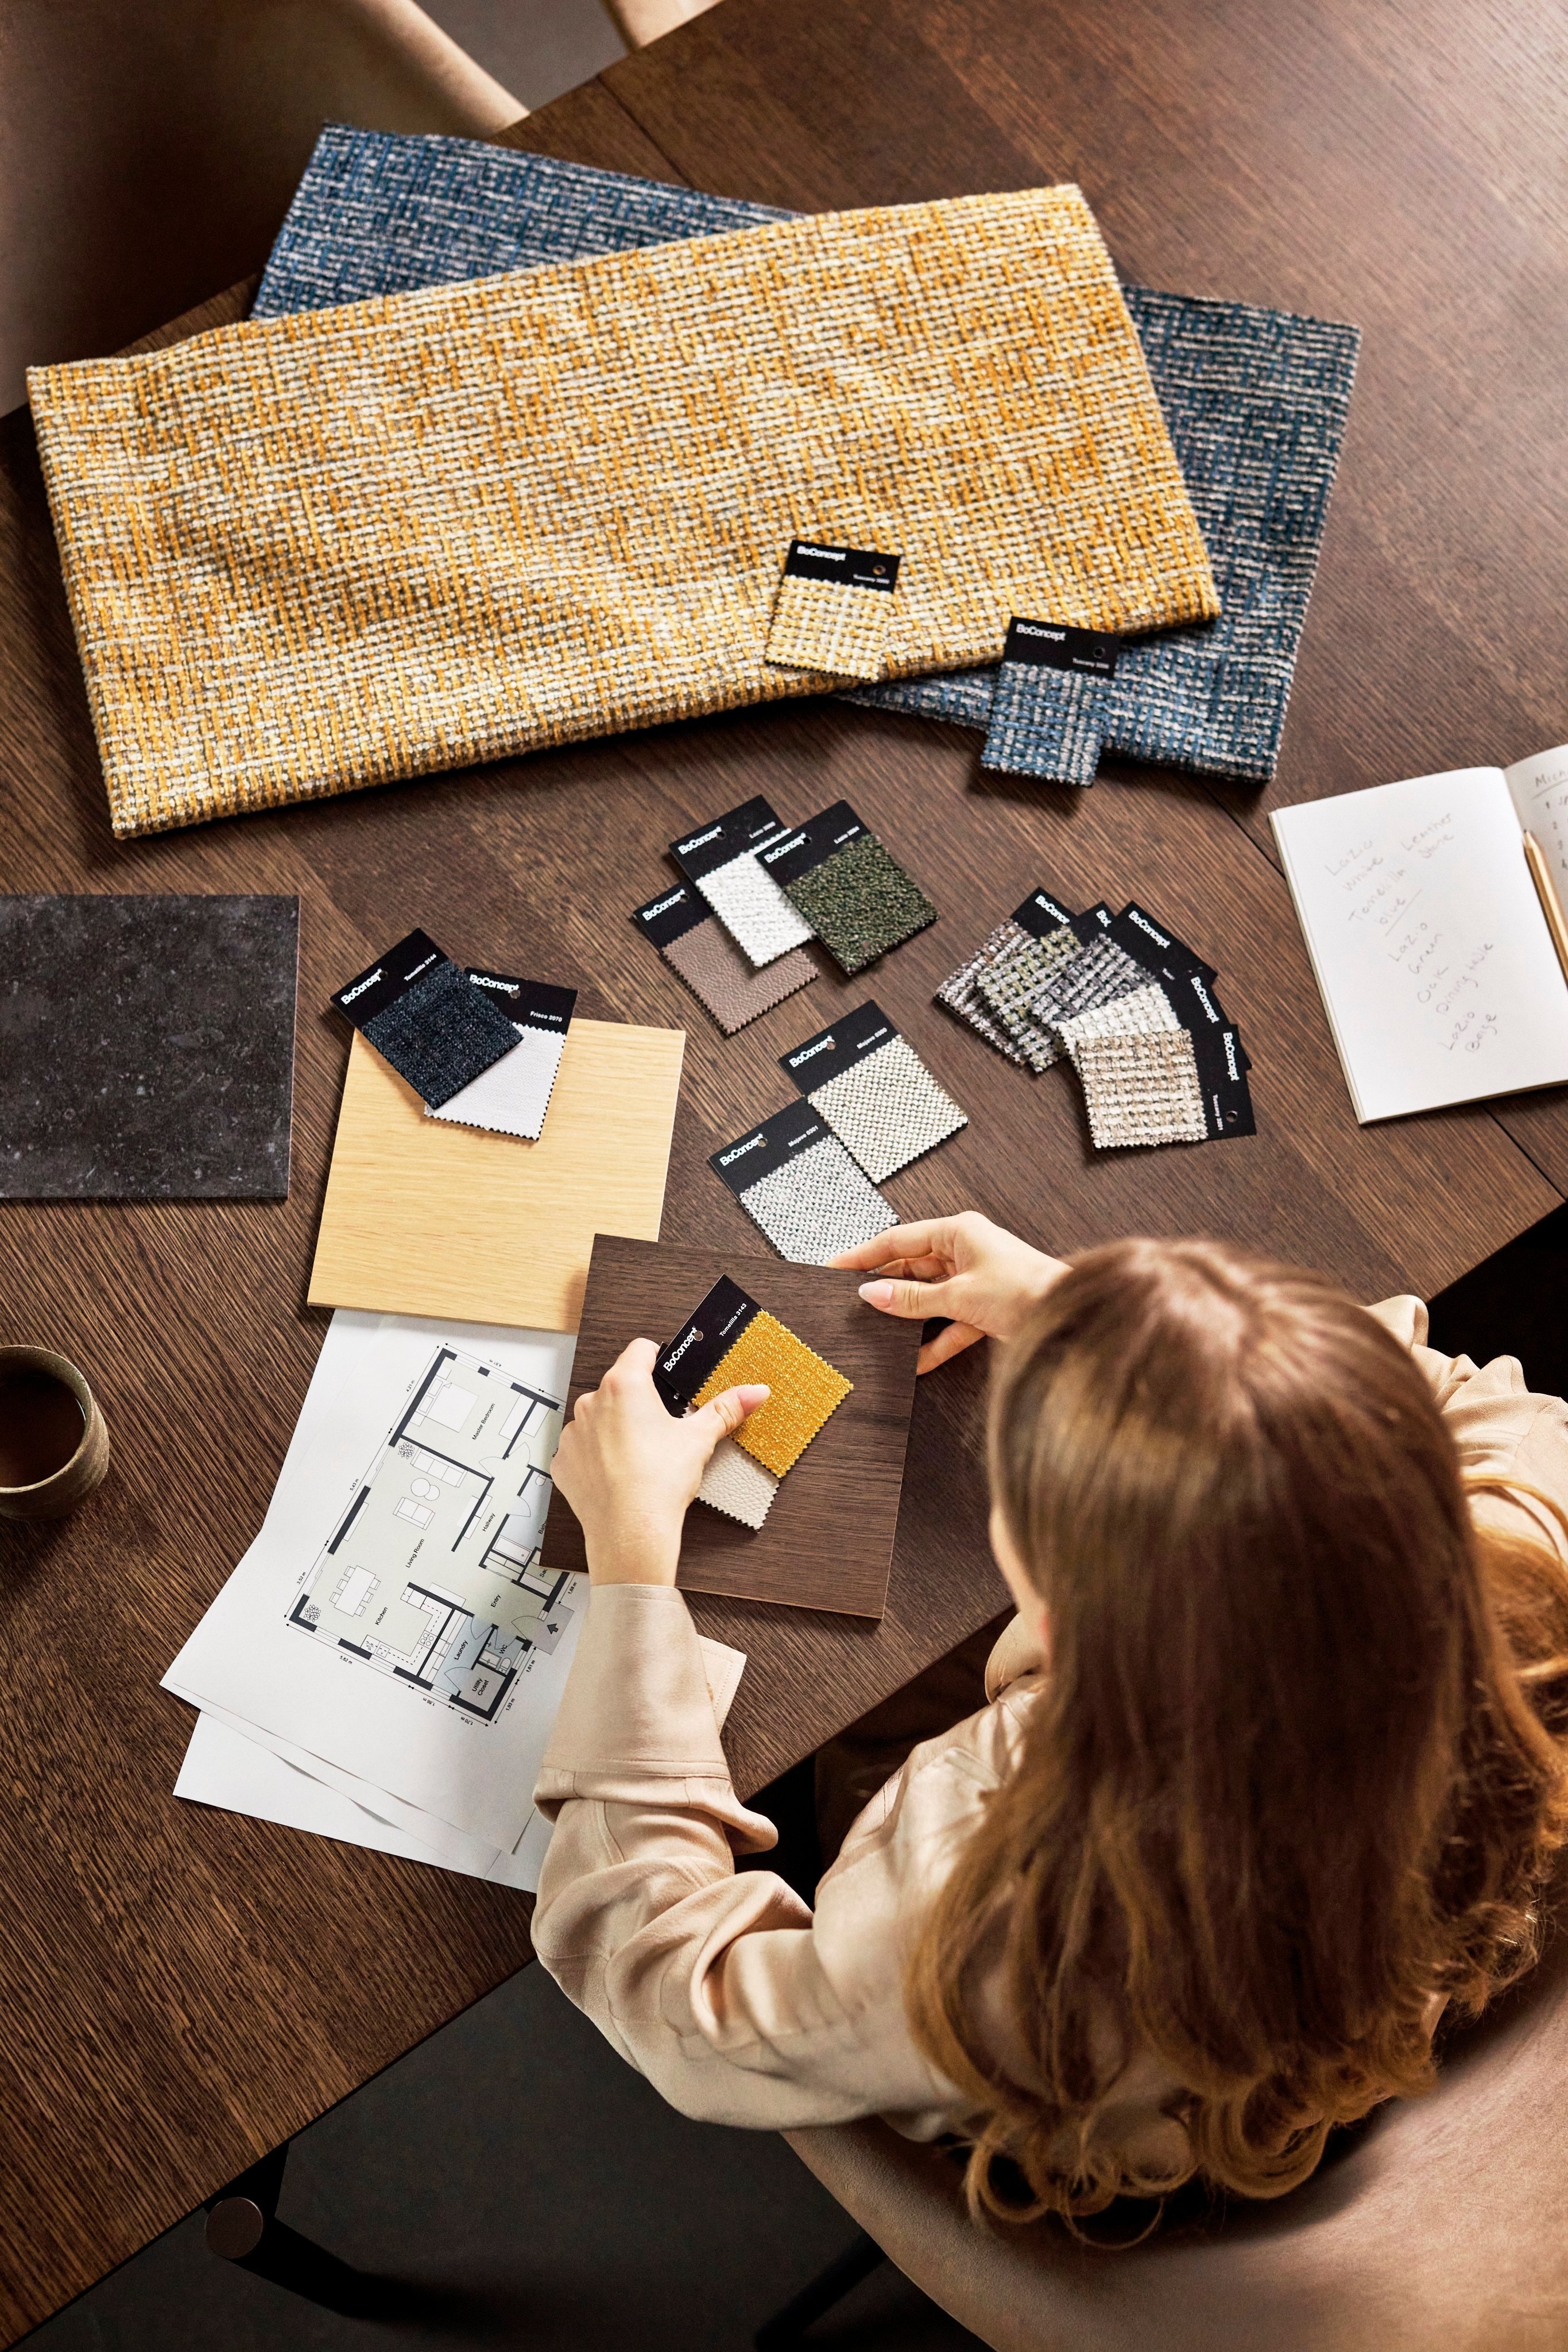 Designer choosing fabric samples on a wooden table with floor plan and notes.